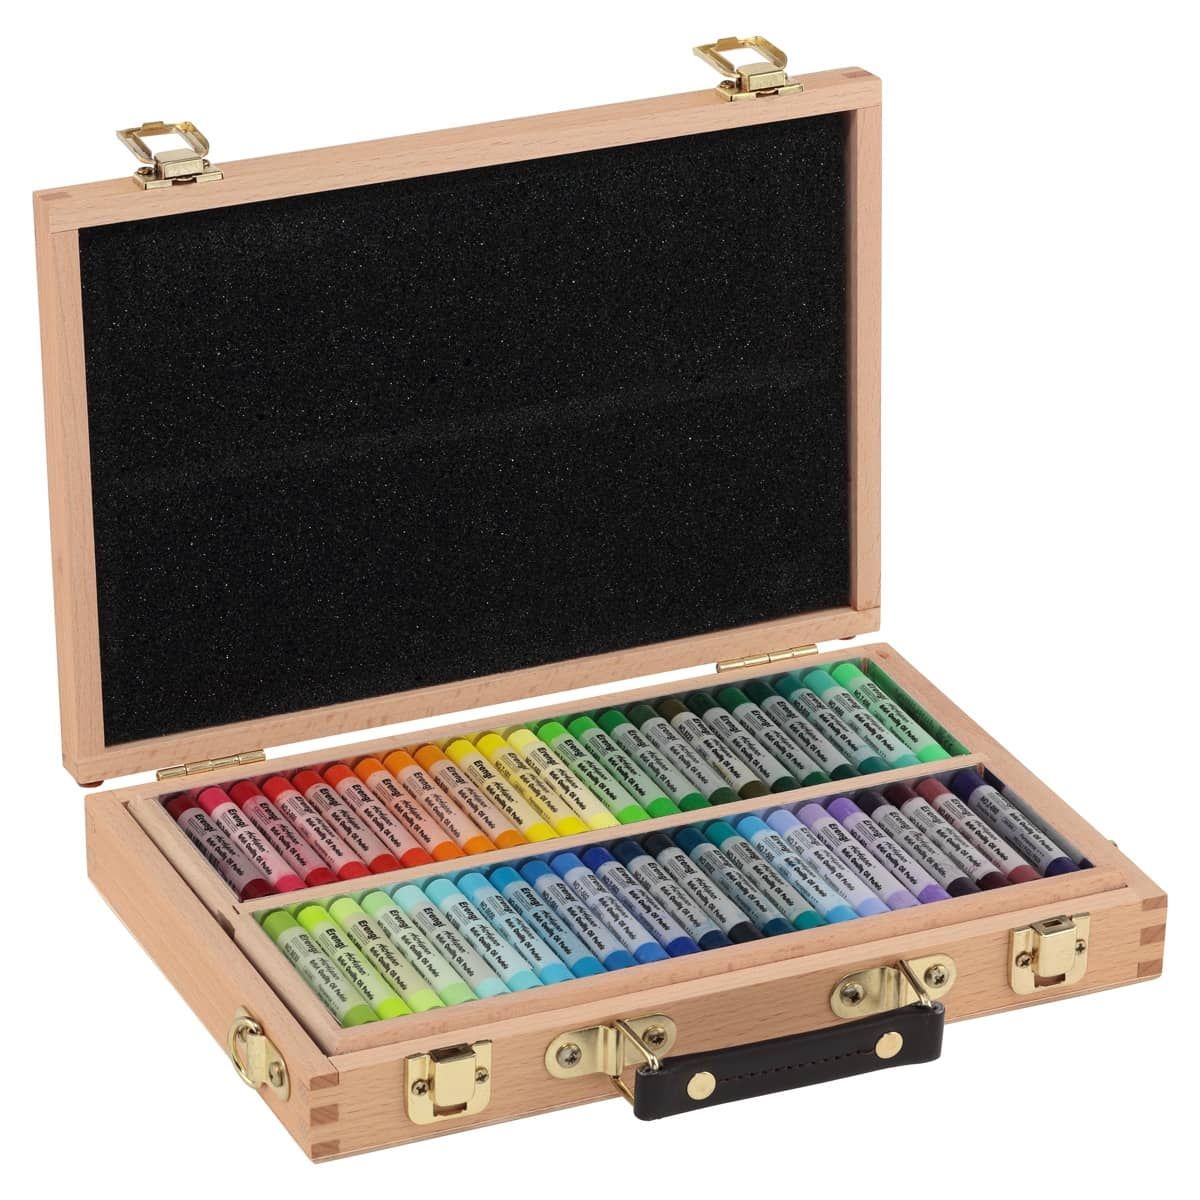 86 Piece Art supplies Set with Oil Pastels – 1981Life